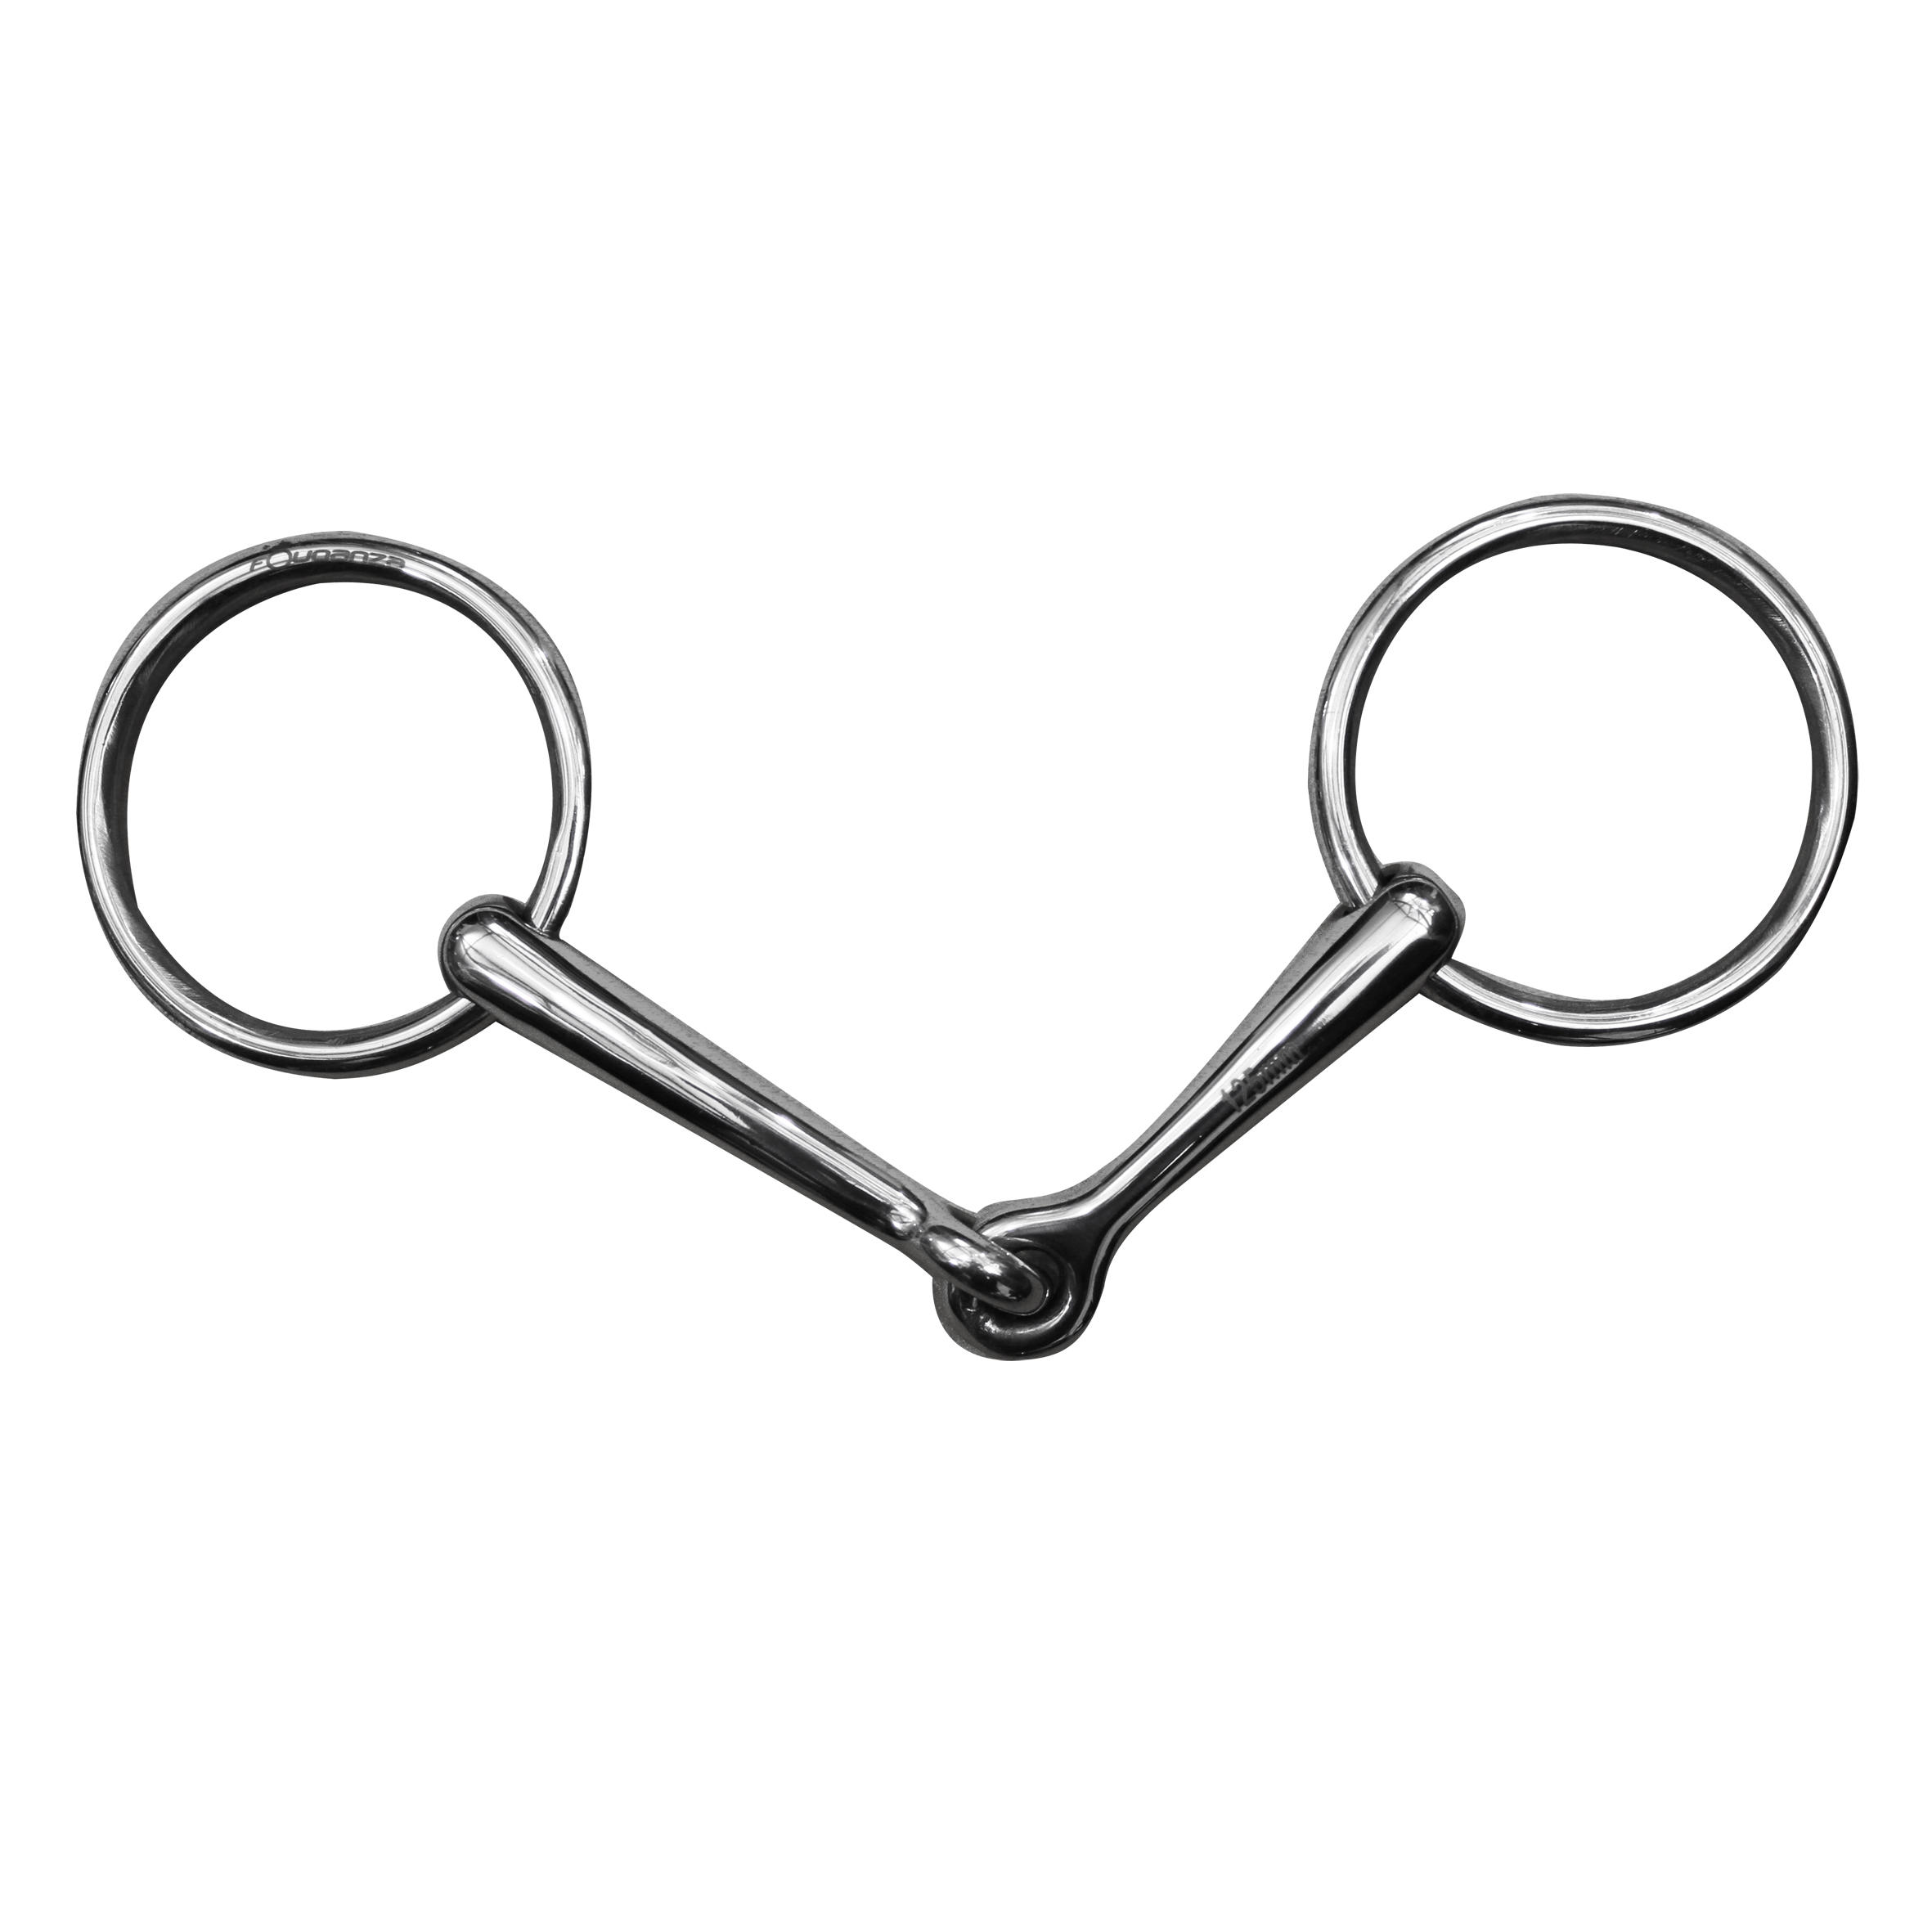 Stainless Steel Horse Riding Curb Bit For Horse/Pony 1/2